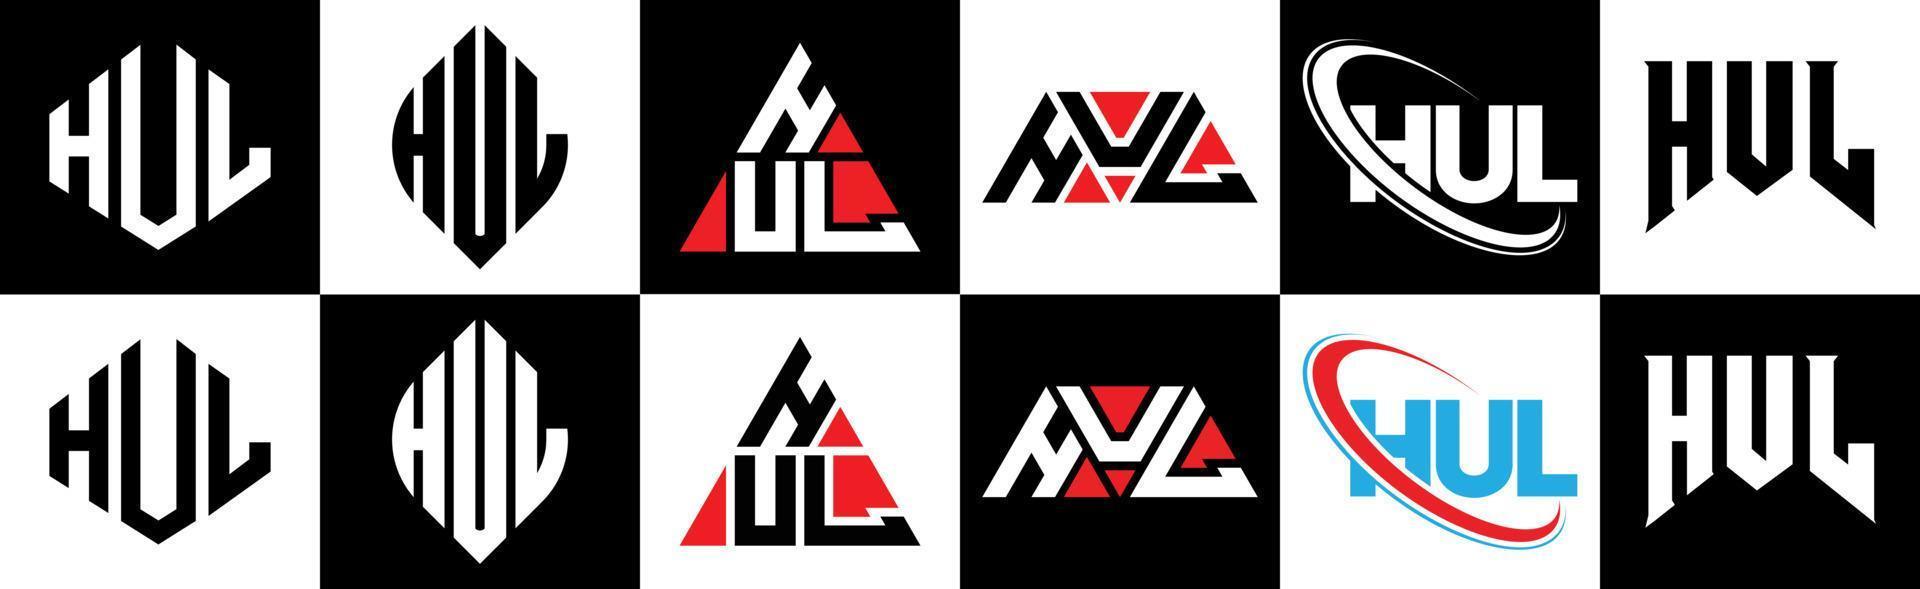 HUL letter logo design in six style. HUL polygon, circle, triangle, hexagon, flat and simple style with black and white color variation letter logo set in one artboard. HUL minimalist and classic logo vector